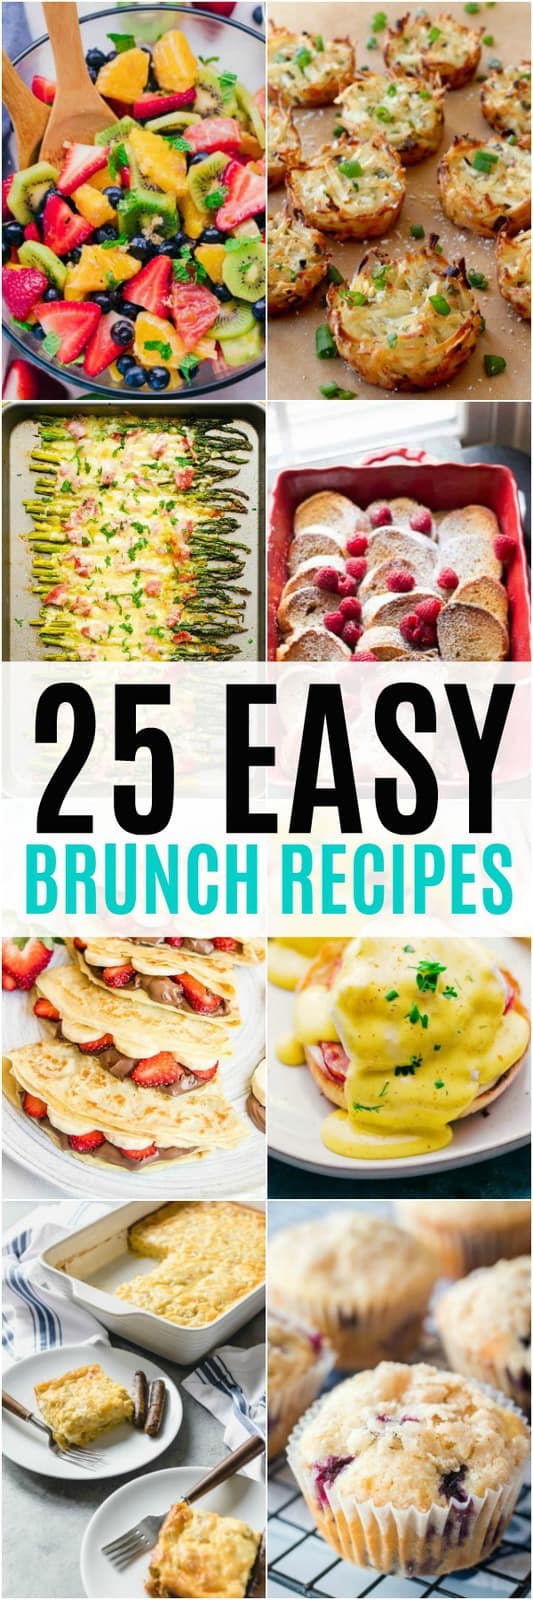 Wake up late and still get breakfast on the table with these 25 Easy Brunch Recipes!  They're sure to kick off your lazy weekend in the most delicious way!